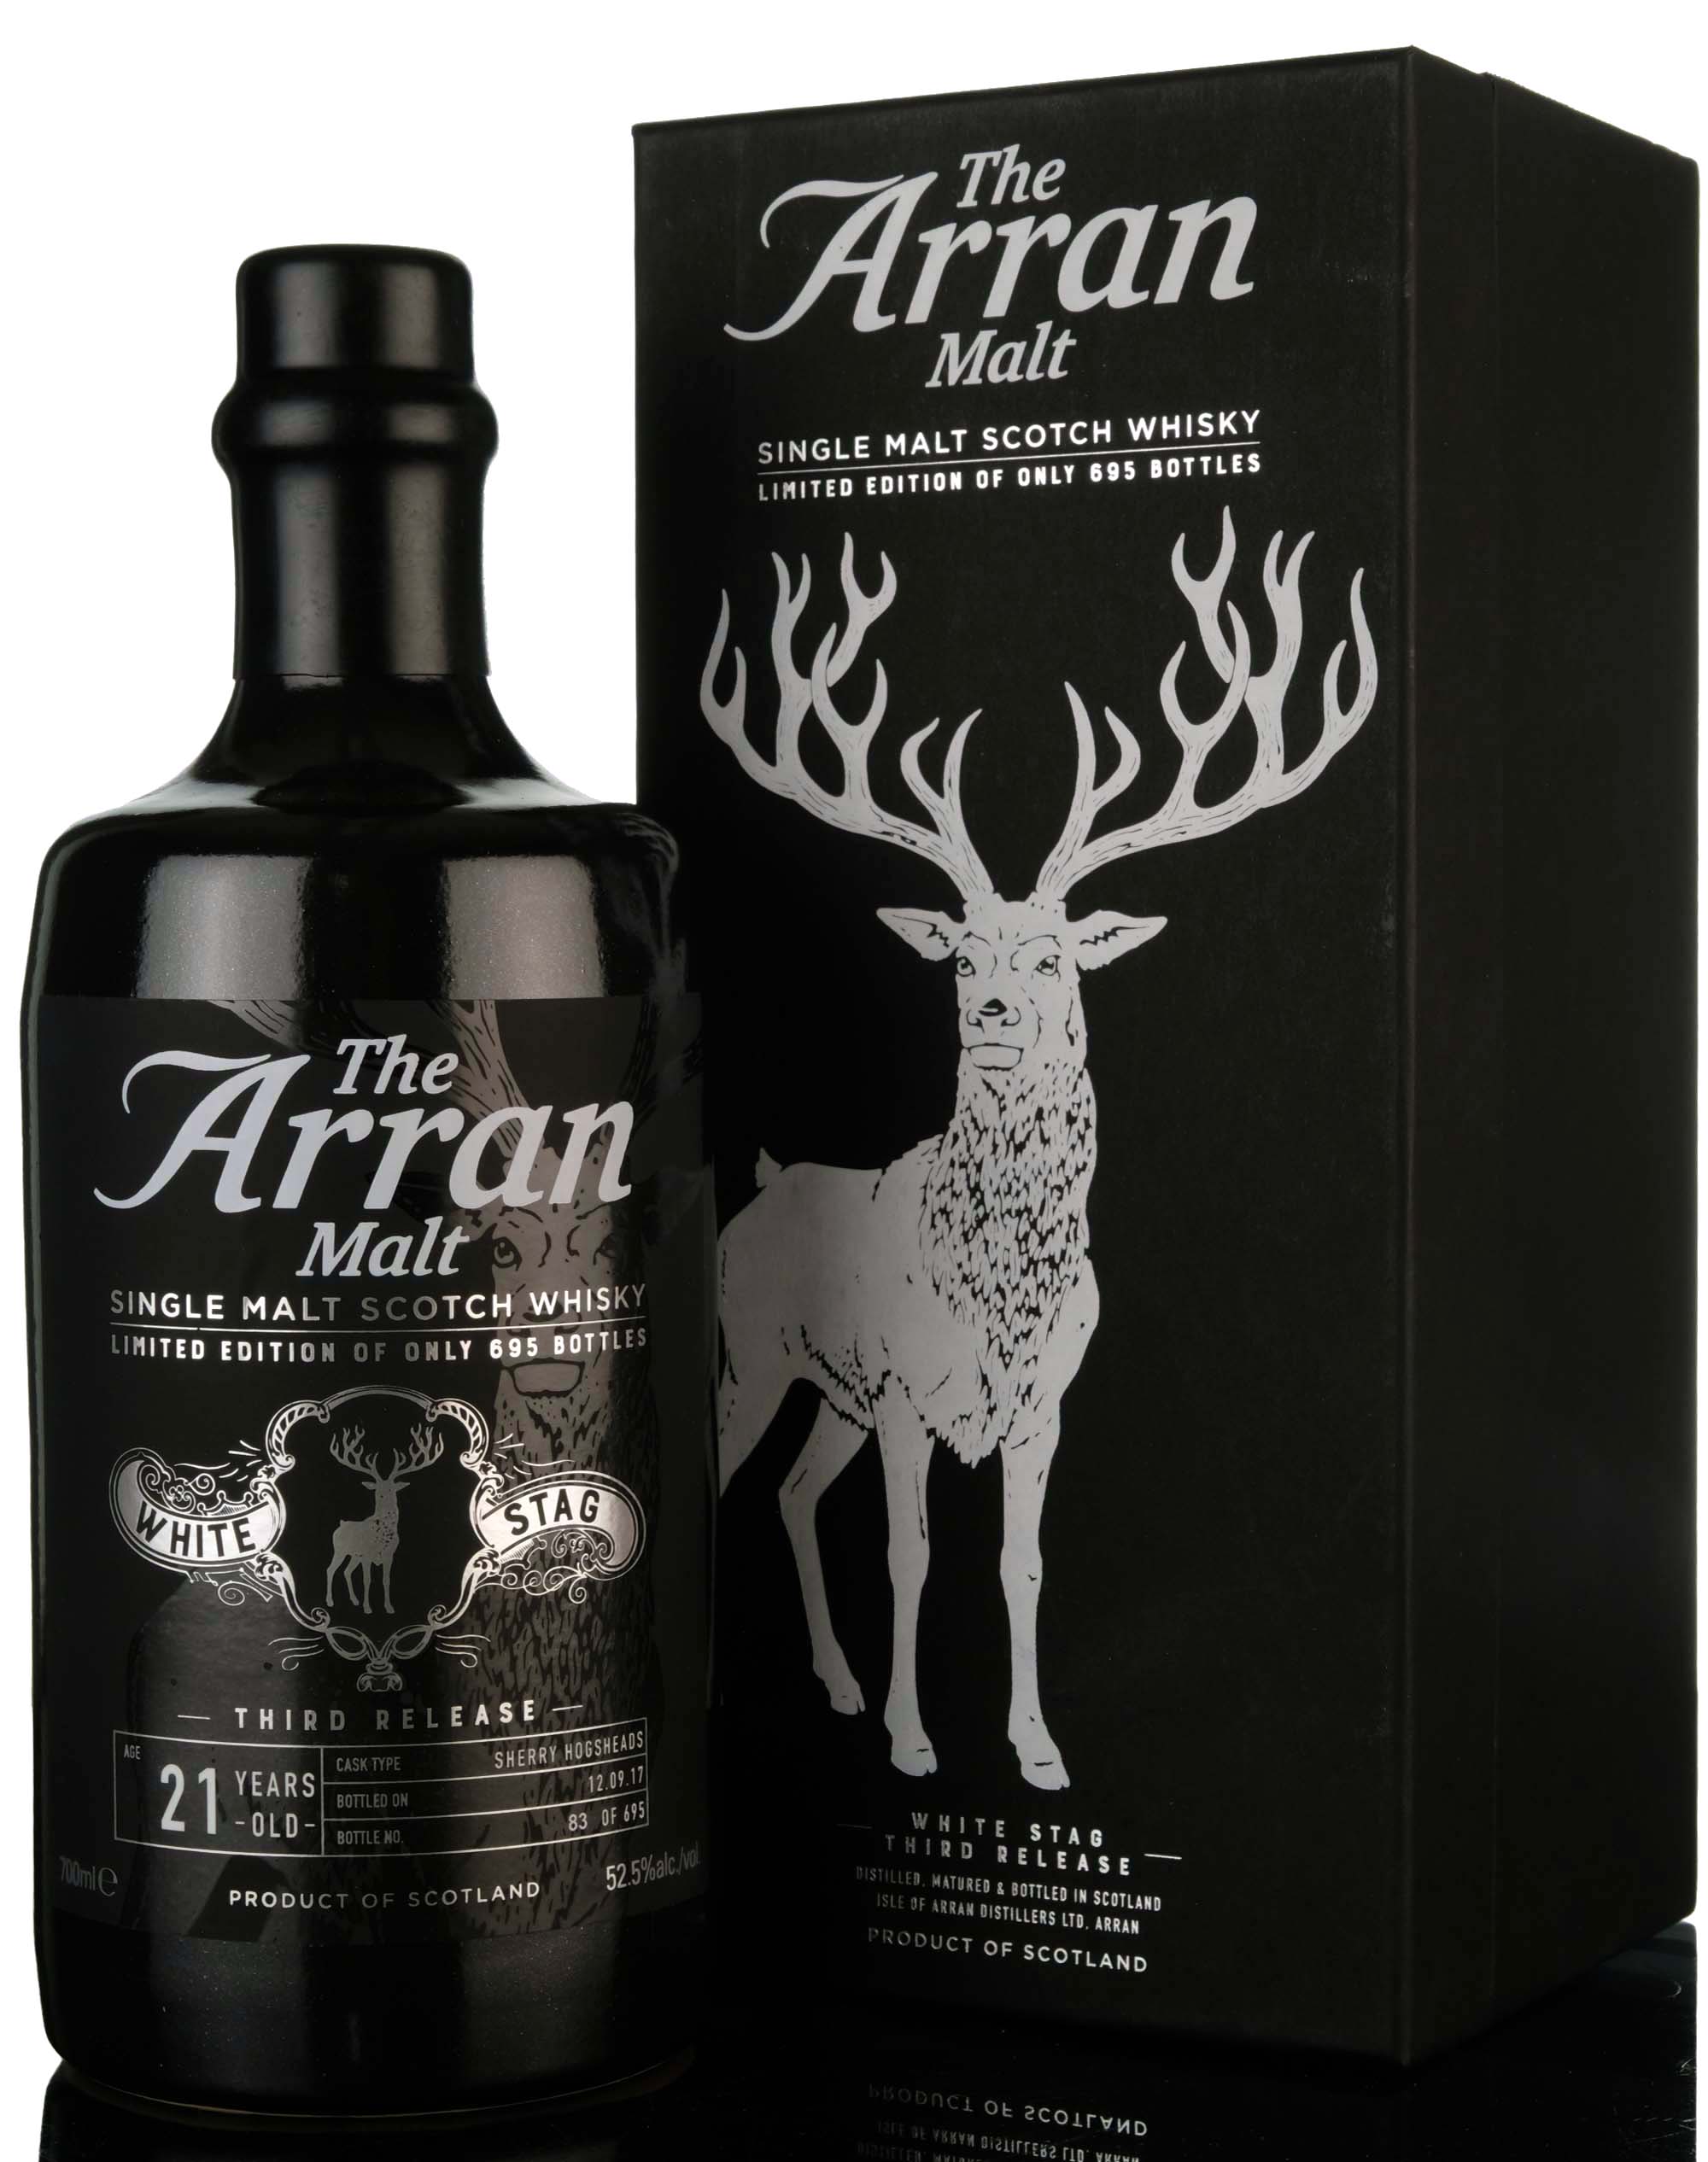 Arran 21 Year Old - White Stag - 3rd Release - 2017 Release